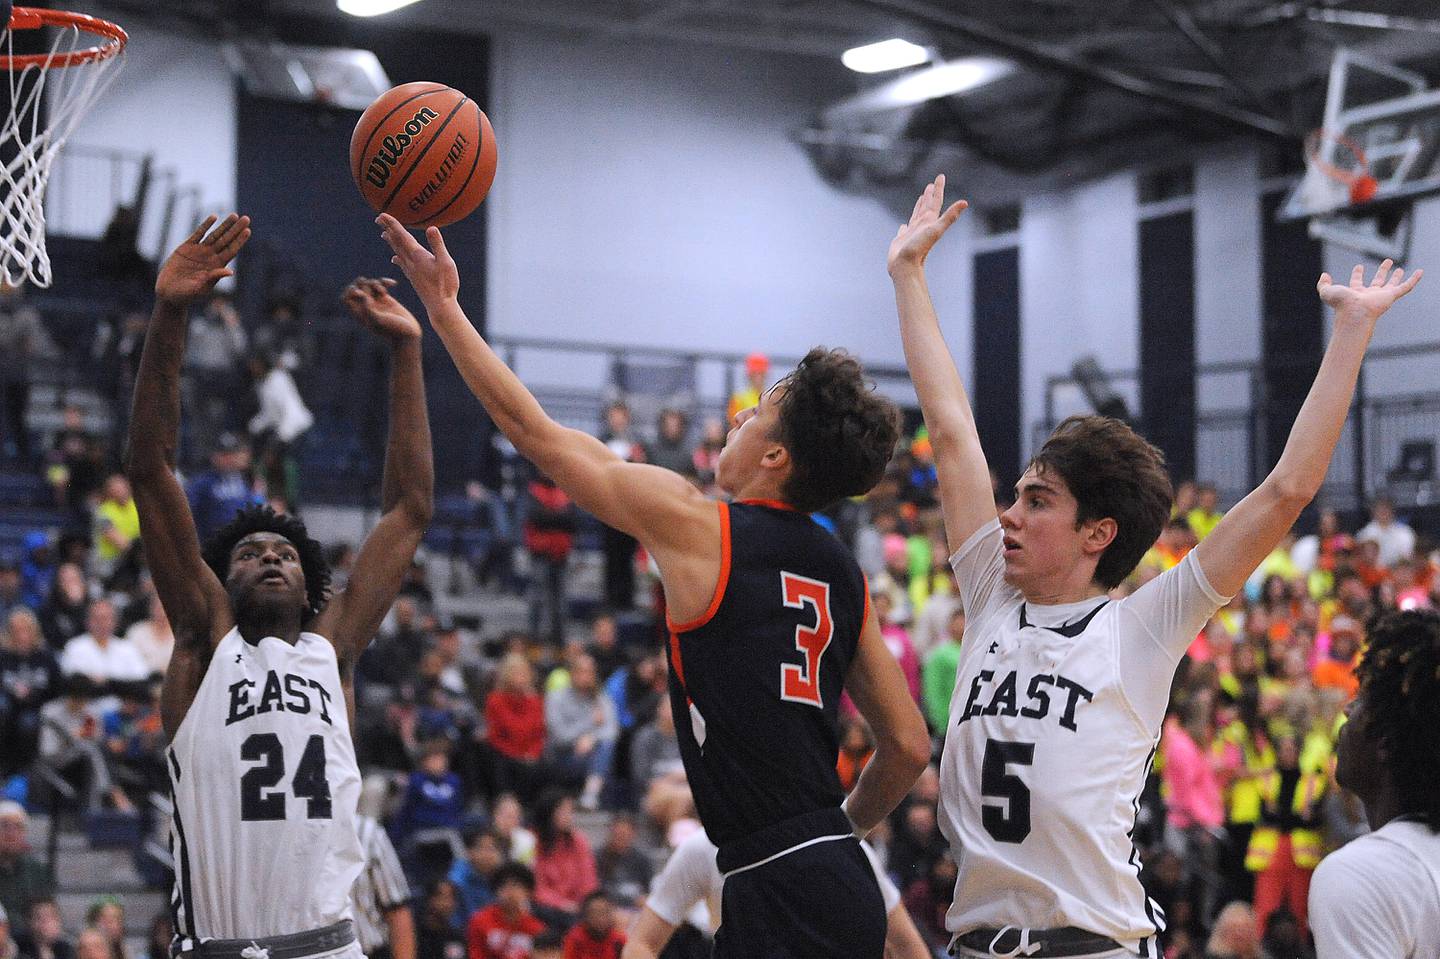 Oswego's Max Niesman (3) finger rolls a shot into the basket between Oswego East defenders Mekhi Lowrey (24) and Mason Blanco (5) during a boys’ varsity game at Oswego East High School on Friday, Dec. 9, 2022.